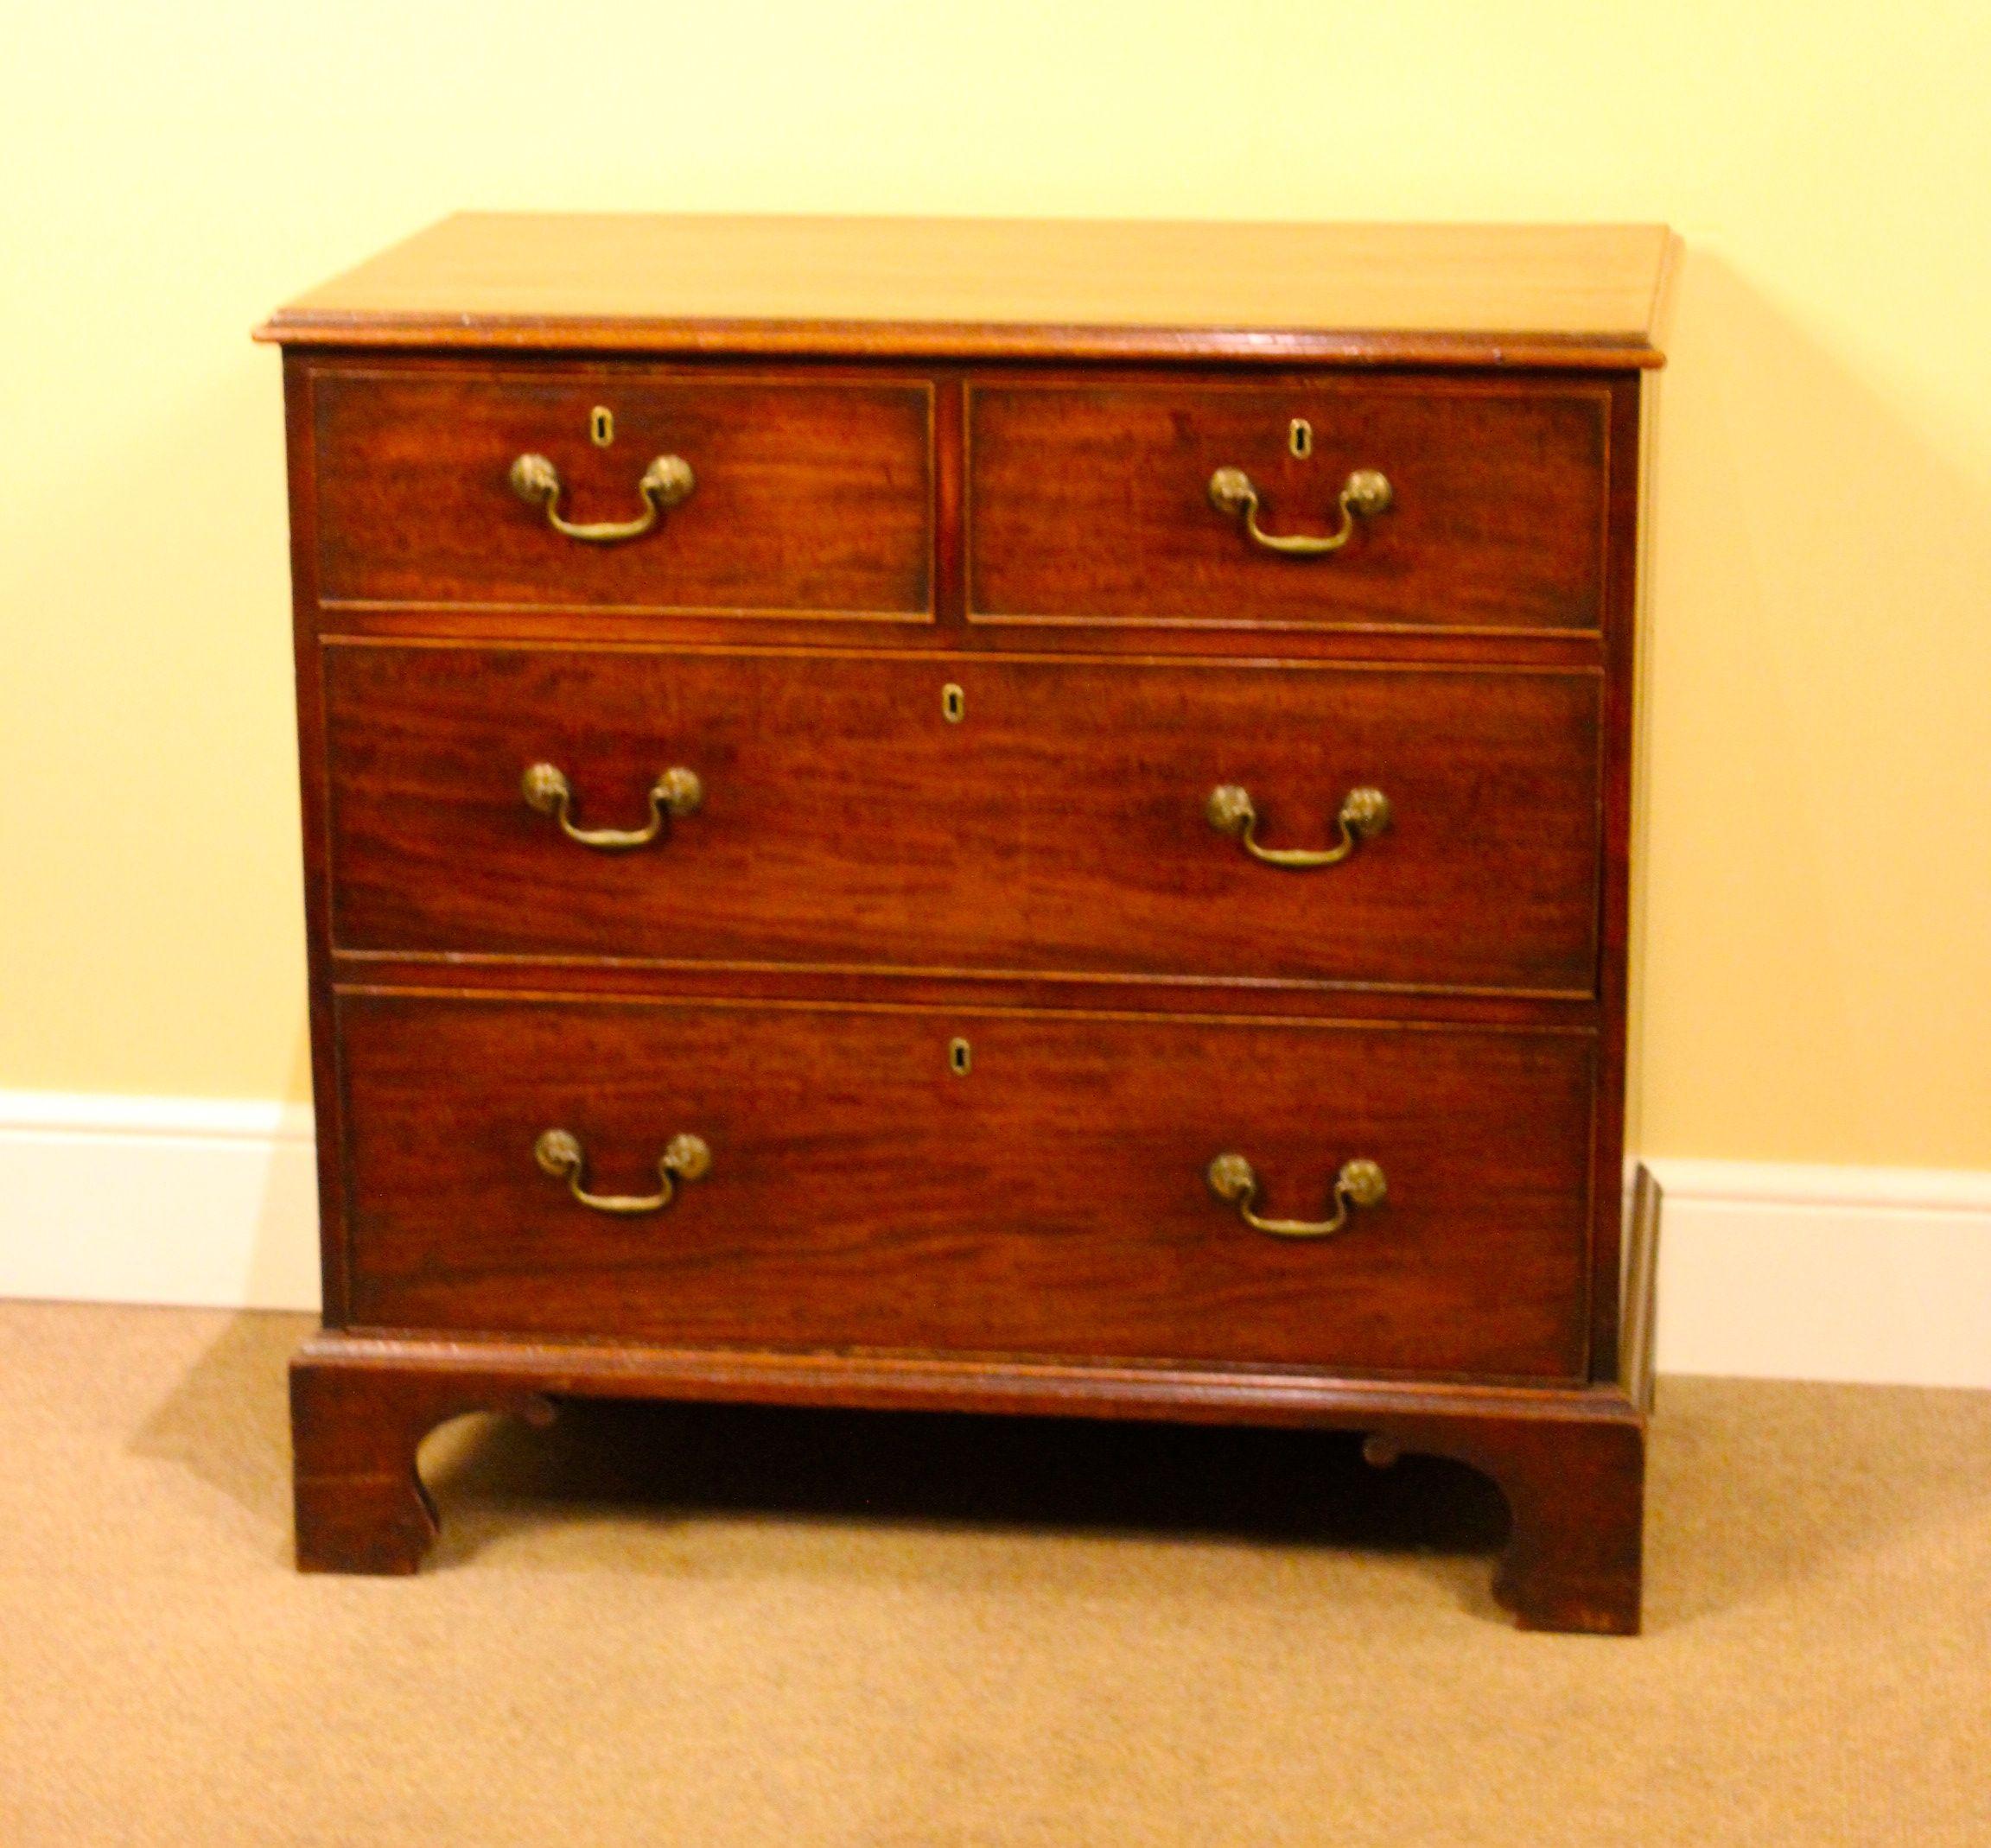 5801
18thc. Mahogany Chest of Drawers
With two short & two long drawers.
Very original with brass swan neck 
Handles on bracket feet.
37.5”w x 36”h x 20.5”d
95cm w x 91cm h x 52cm d

Items can be delivered by independent carrier but please note NOT